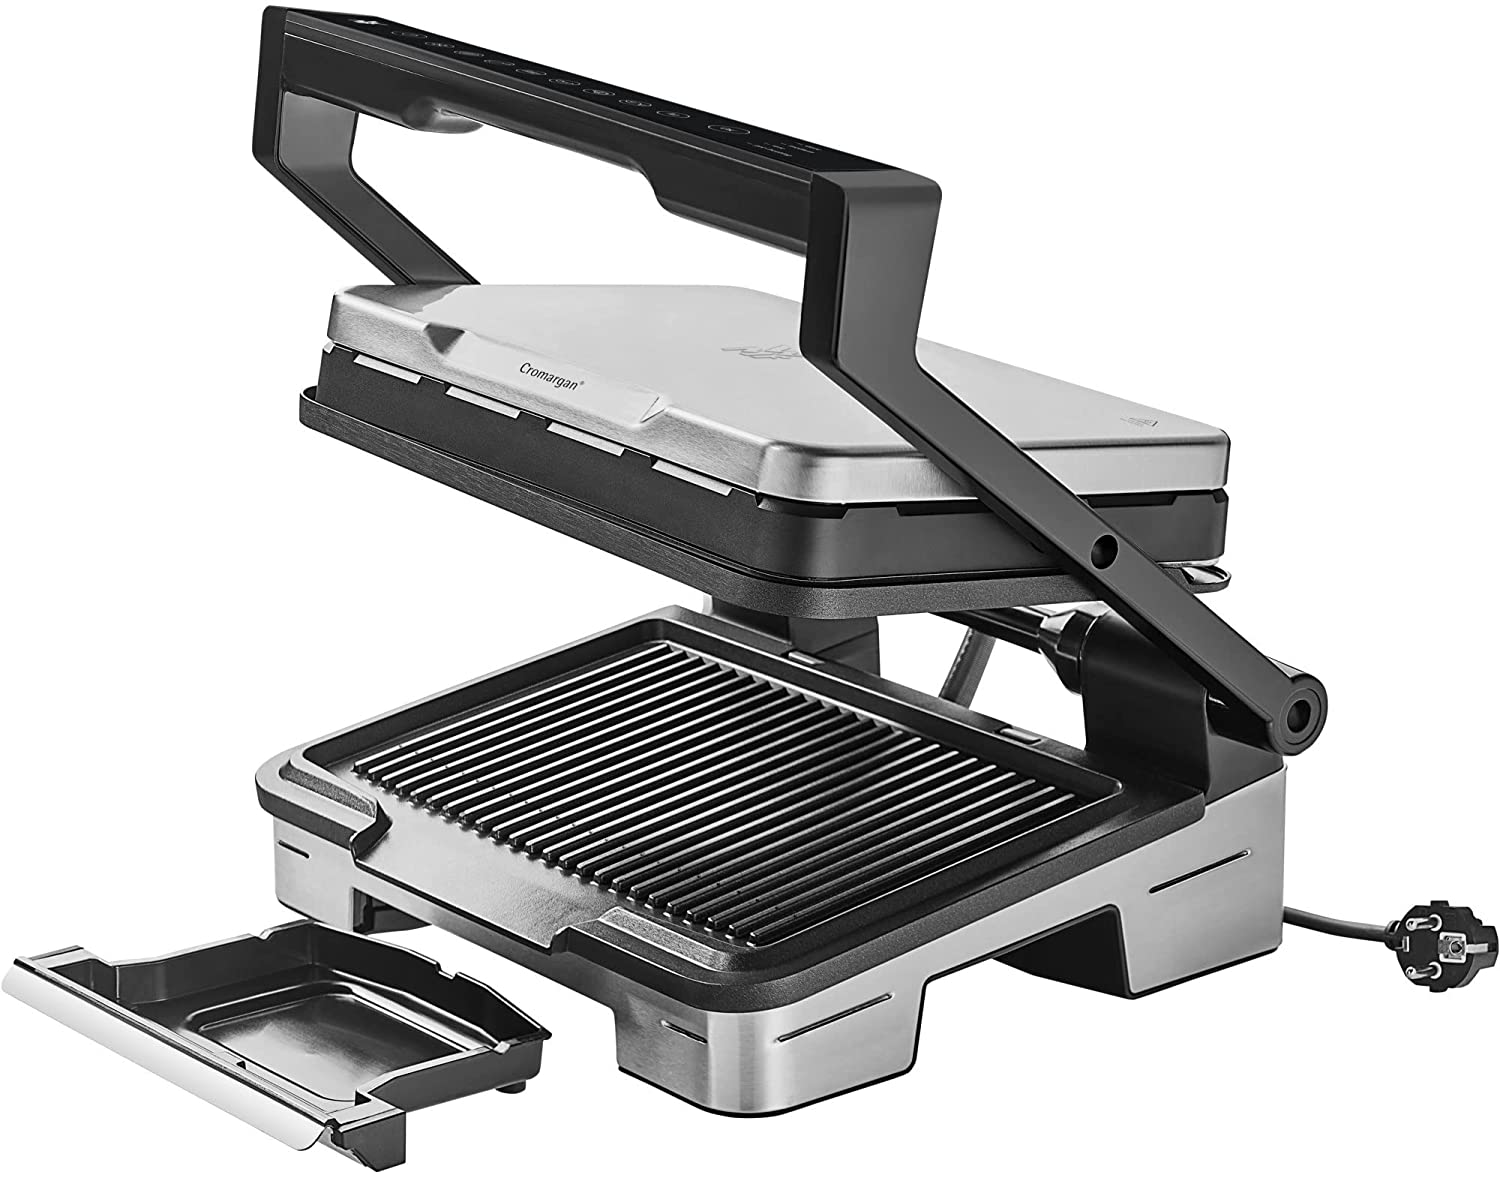 WMF Profi Plus Contact Grill Perfection, Electric Grill 2000 W, 6 Programmes, Sensor Technology, Coated Plates, Panini Grill, Matte Stainless Steel